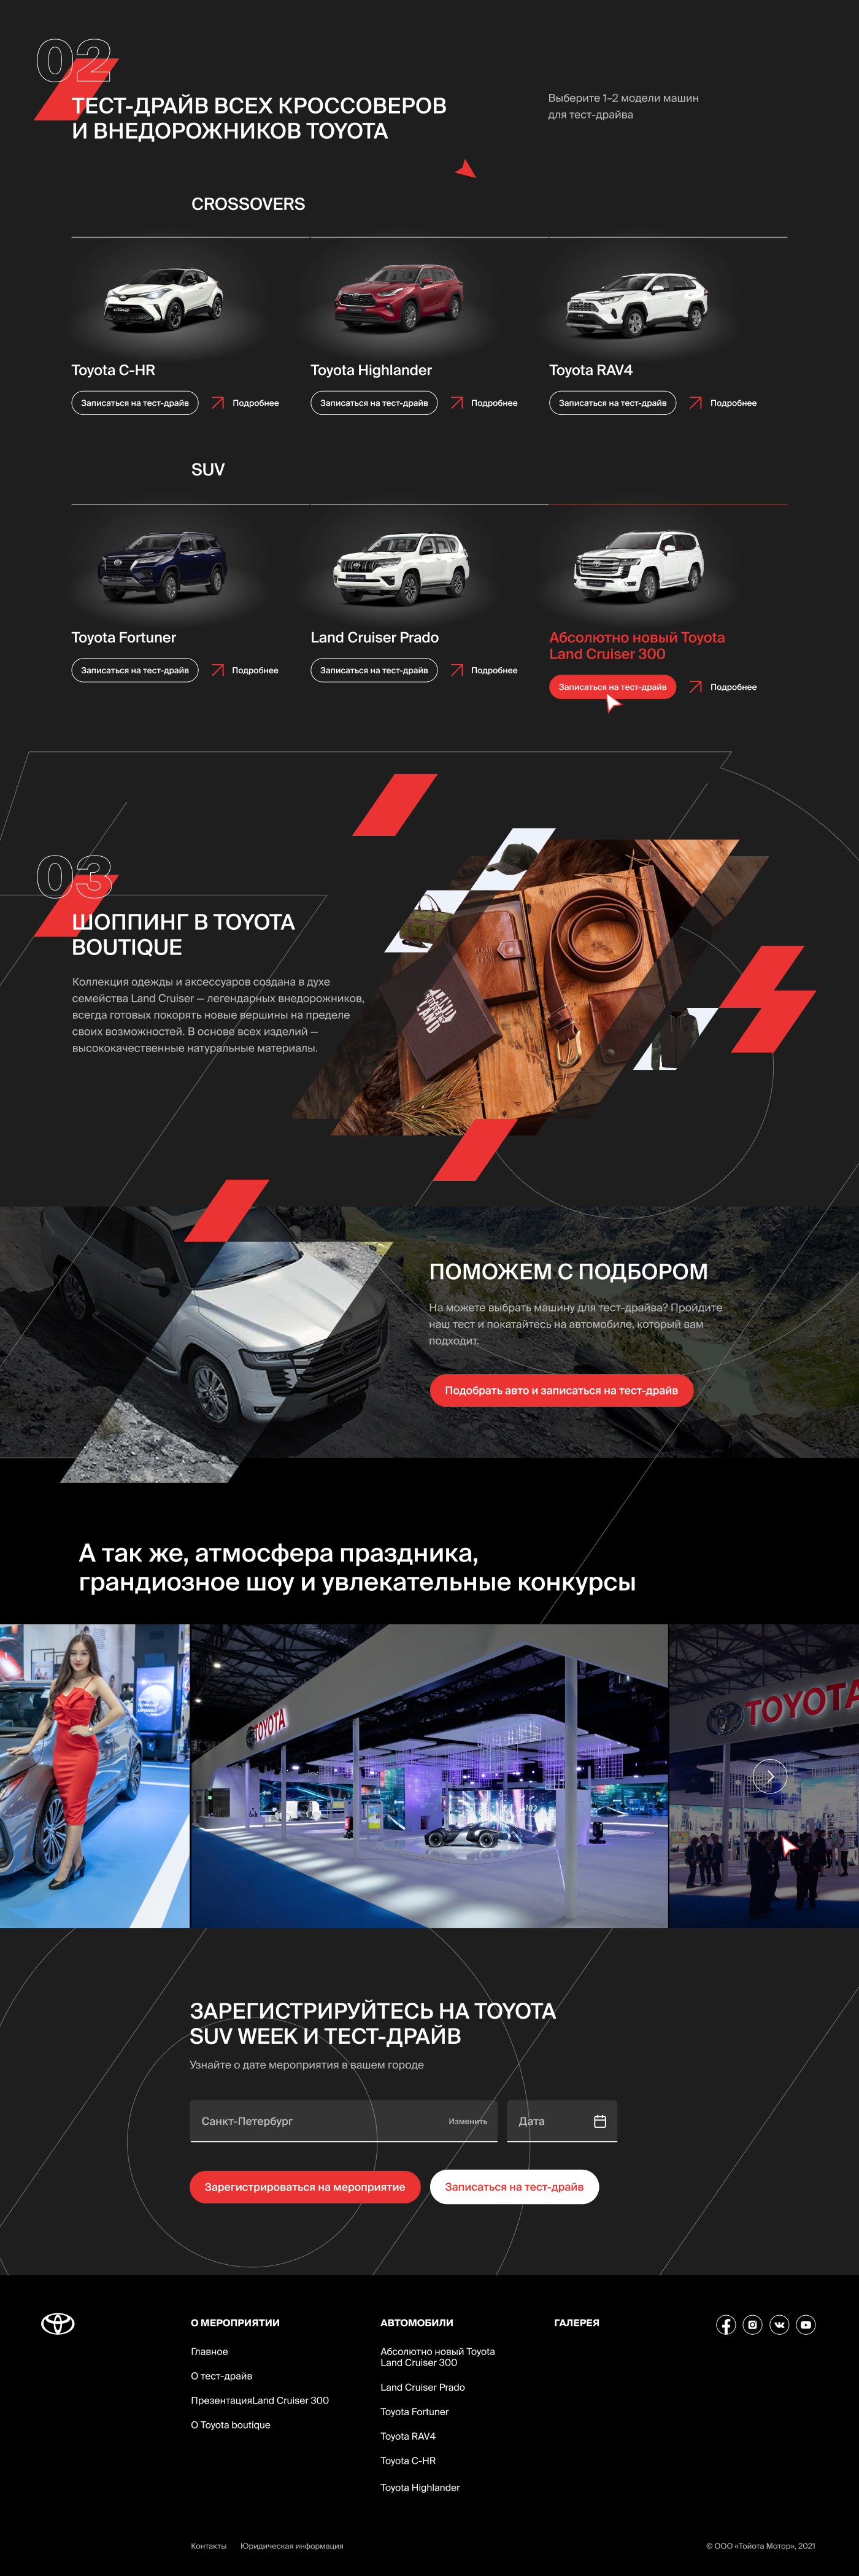 Cars event site LAND CRUISER 300 landing page